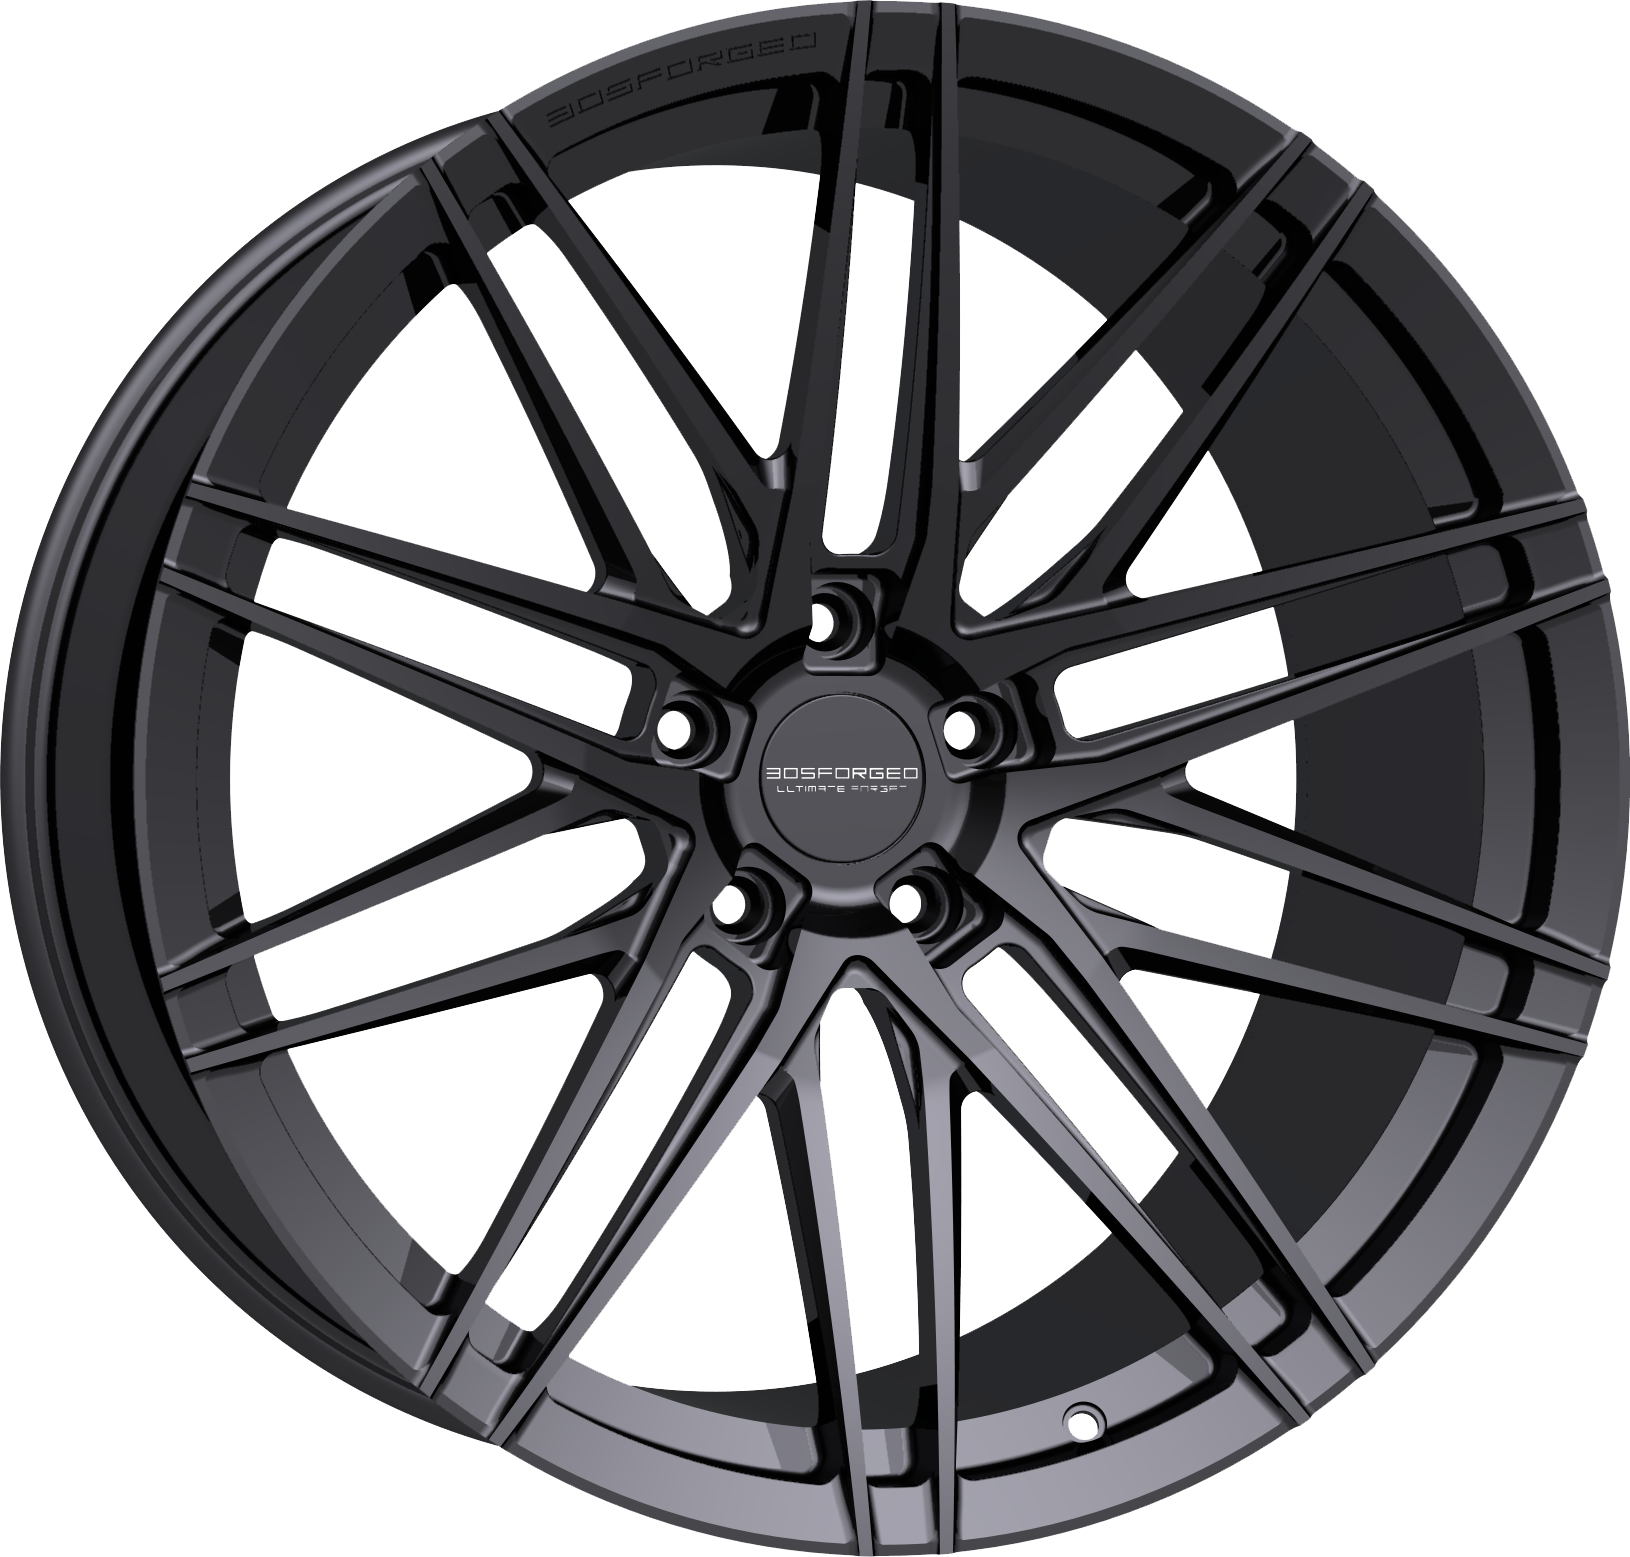 305 Forged UF205 forged wheels